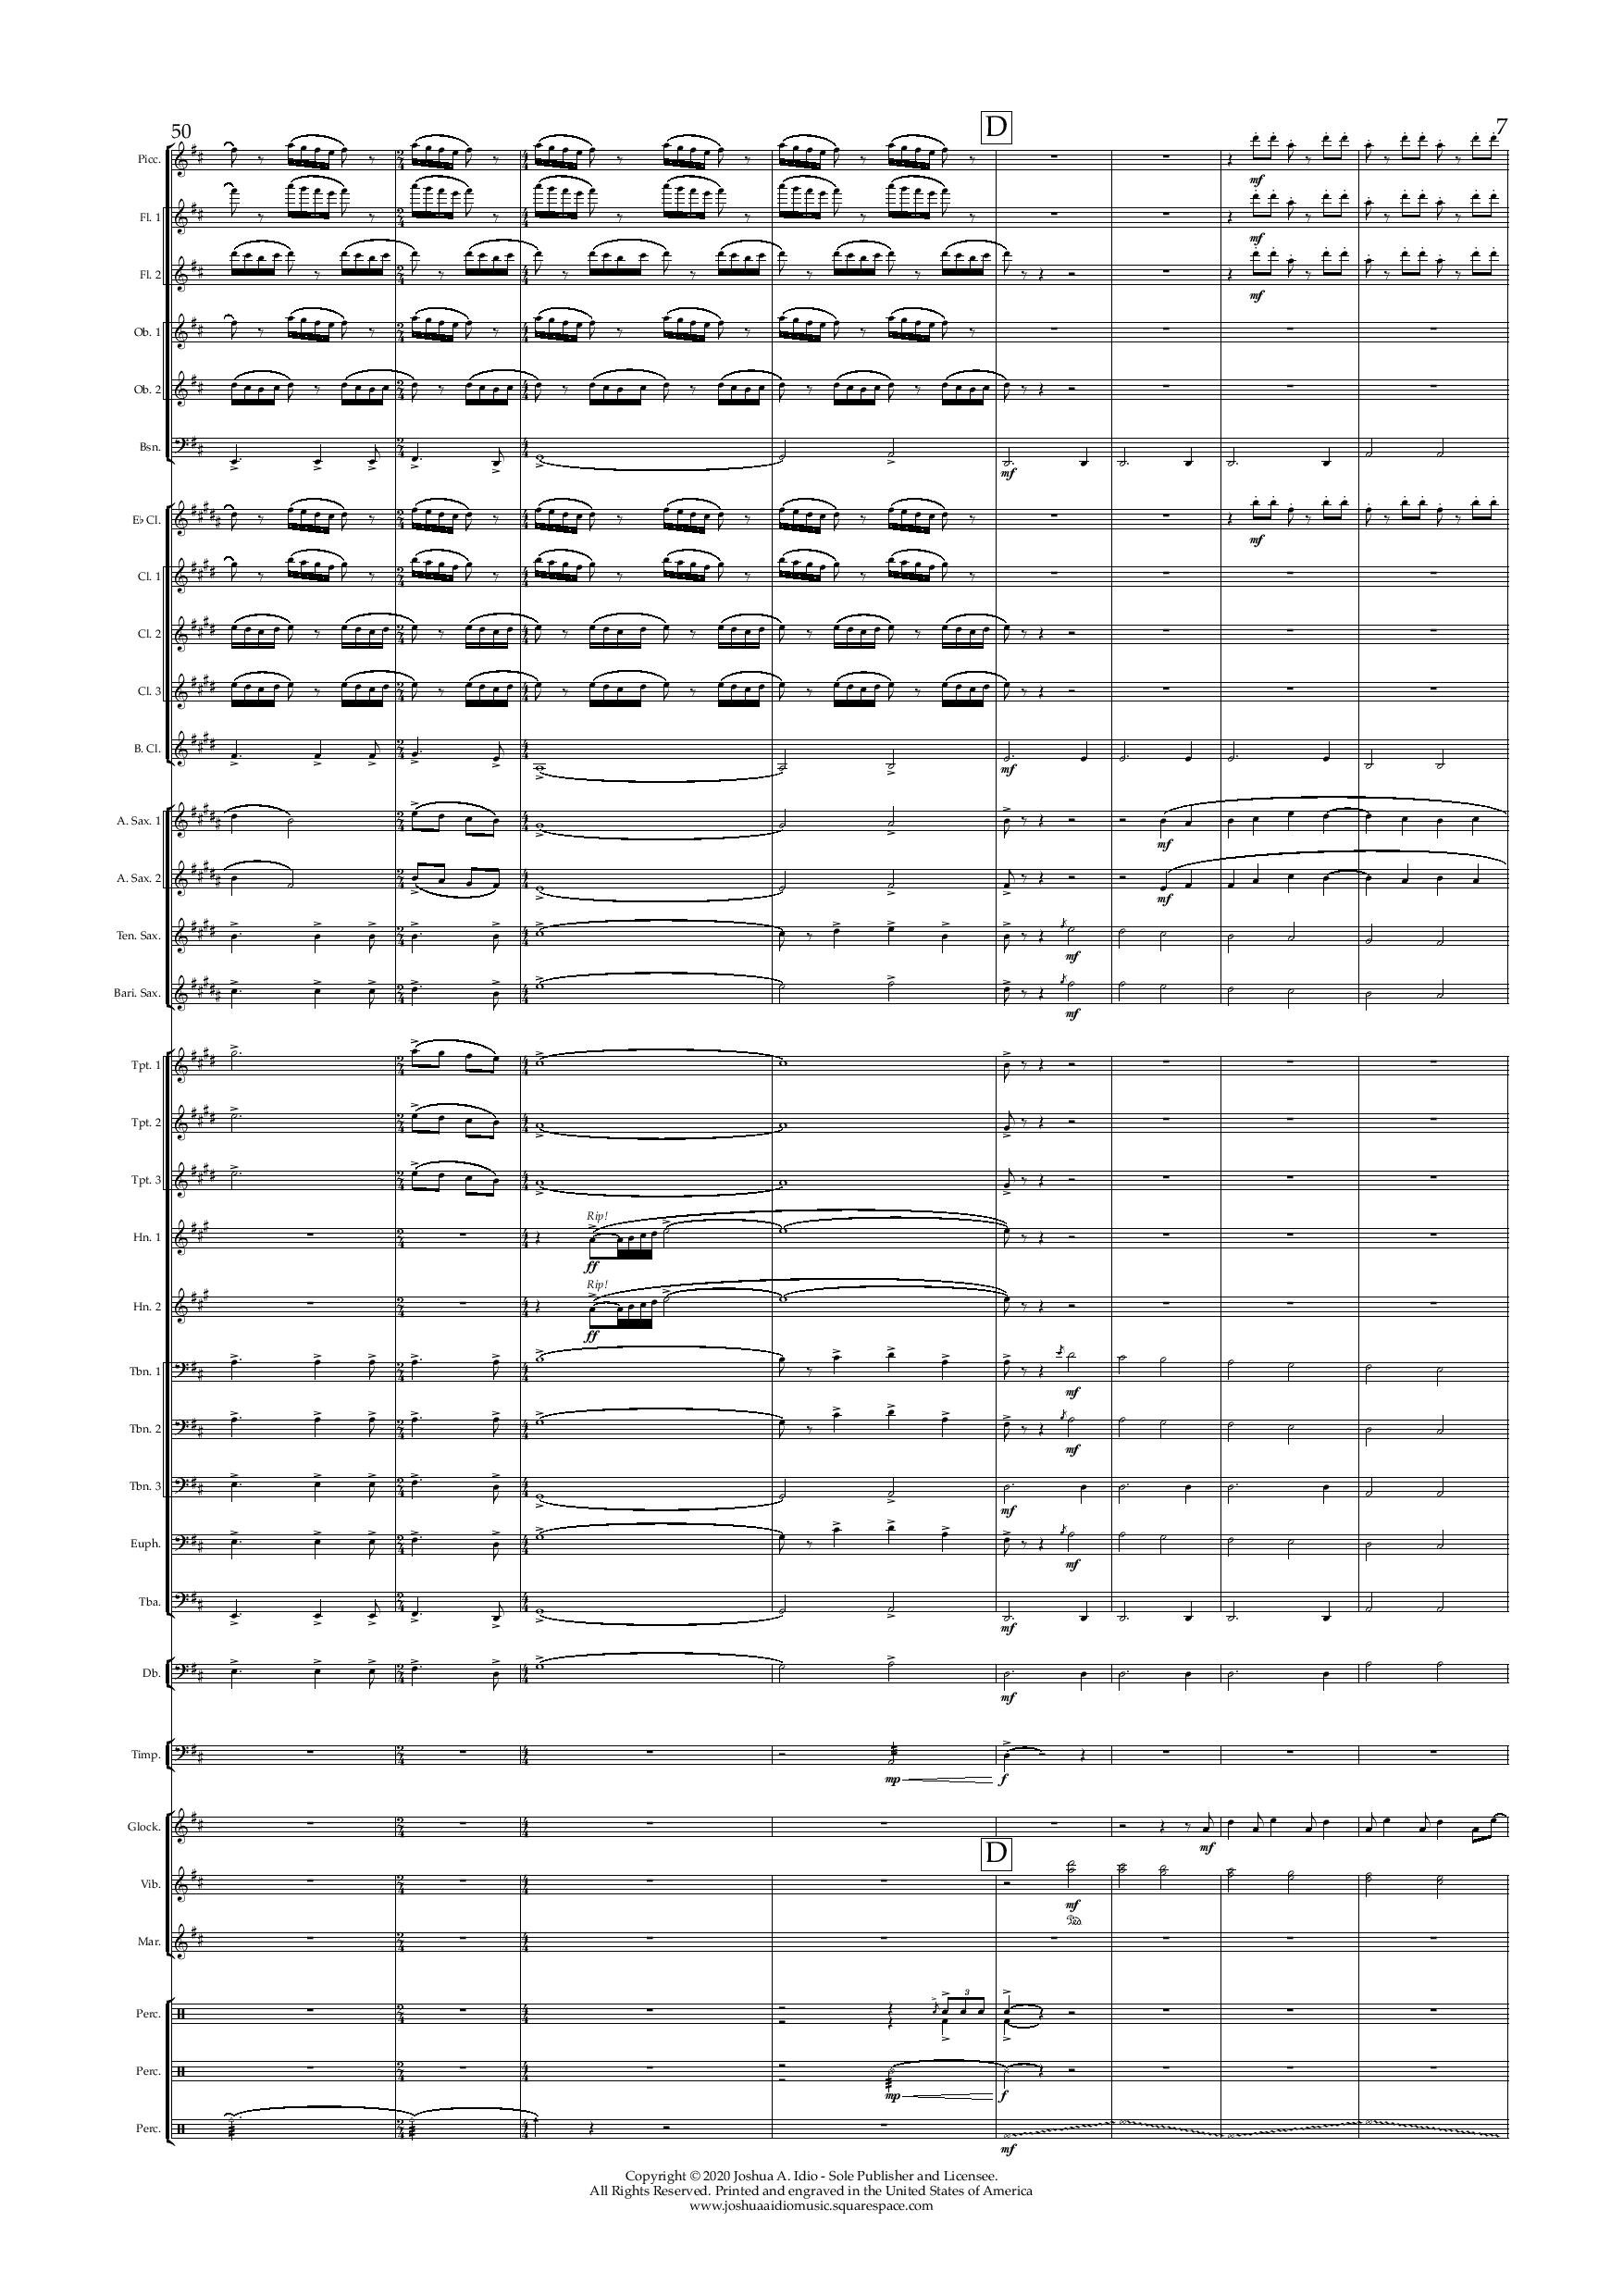 The Cruise Line Dream - Conductor s Score-page-007.jpg